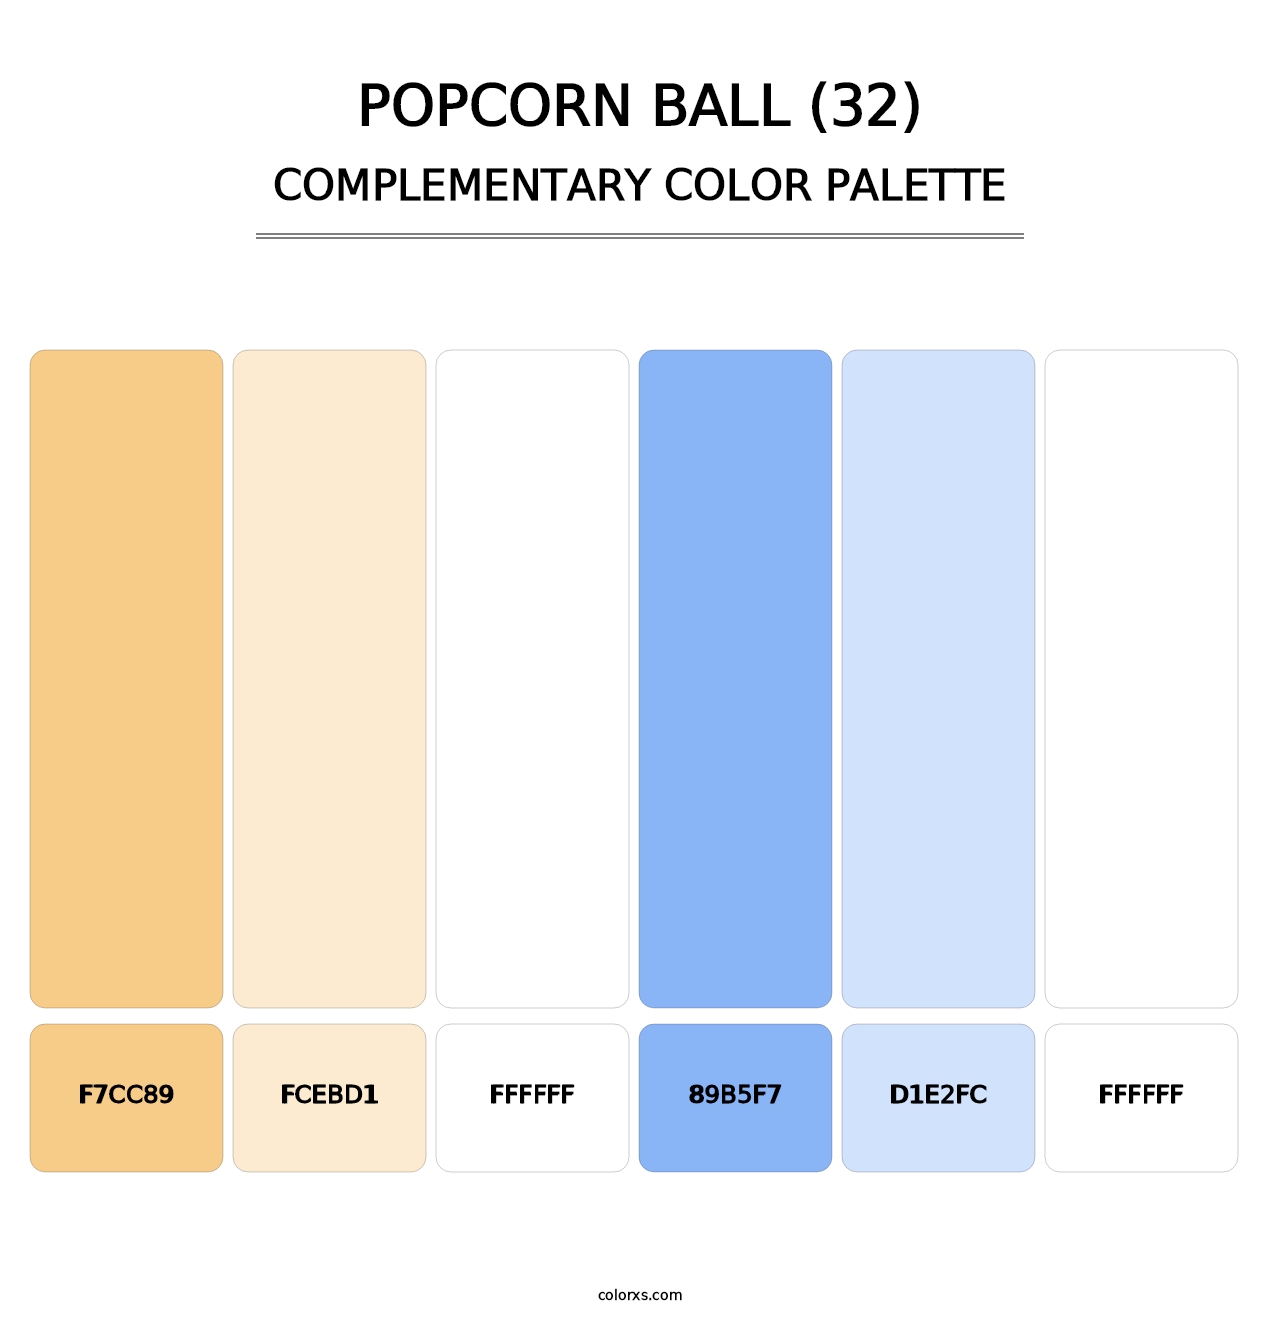 Popcorn Ball (32) - Complementary Color Palette